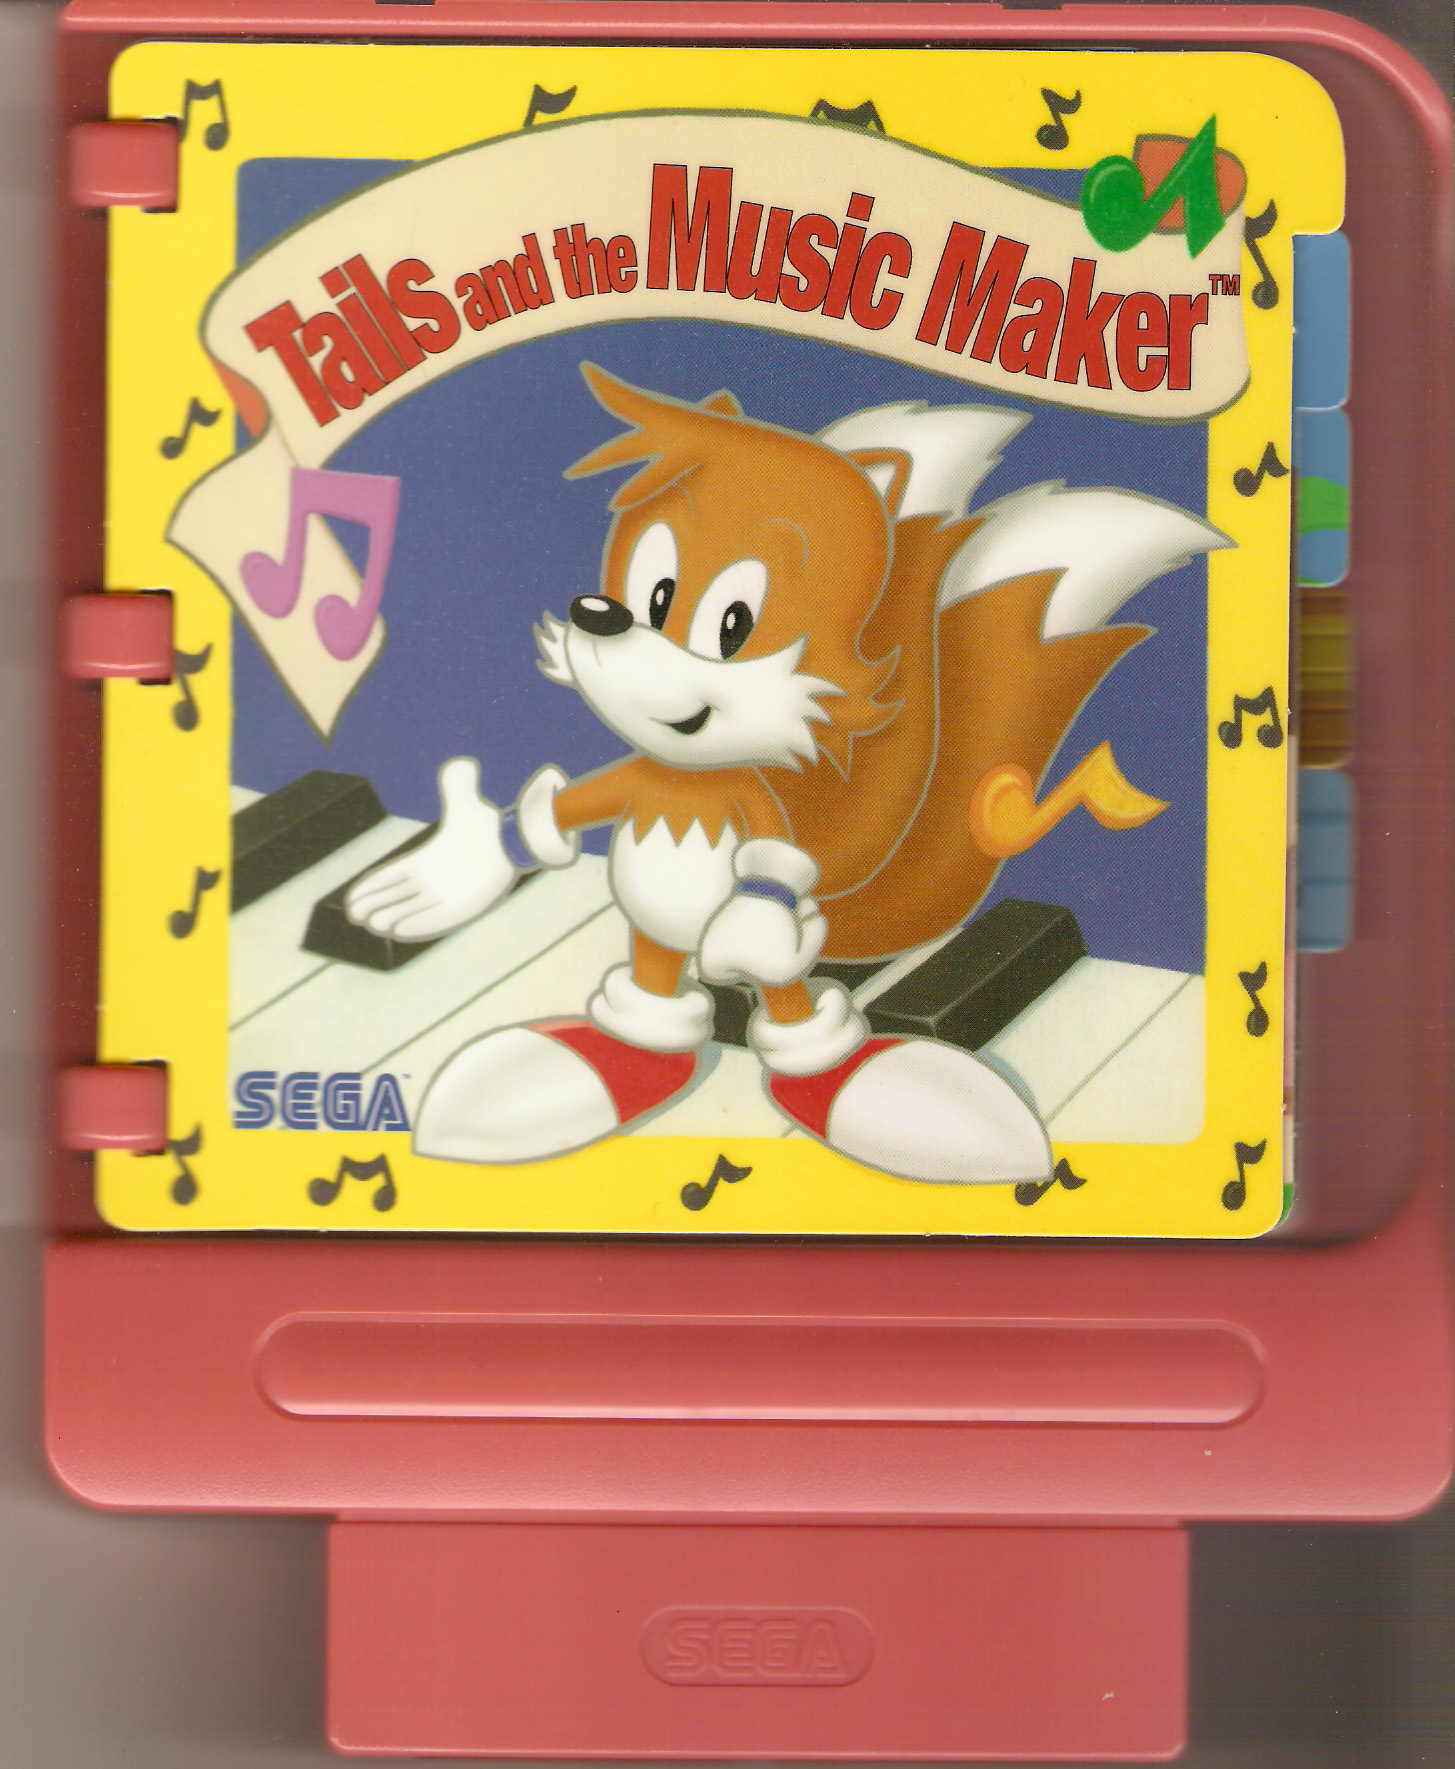 http://info.sonicretro.org/images/5/5a/Tmm_pico_us_cart.jpg